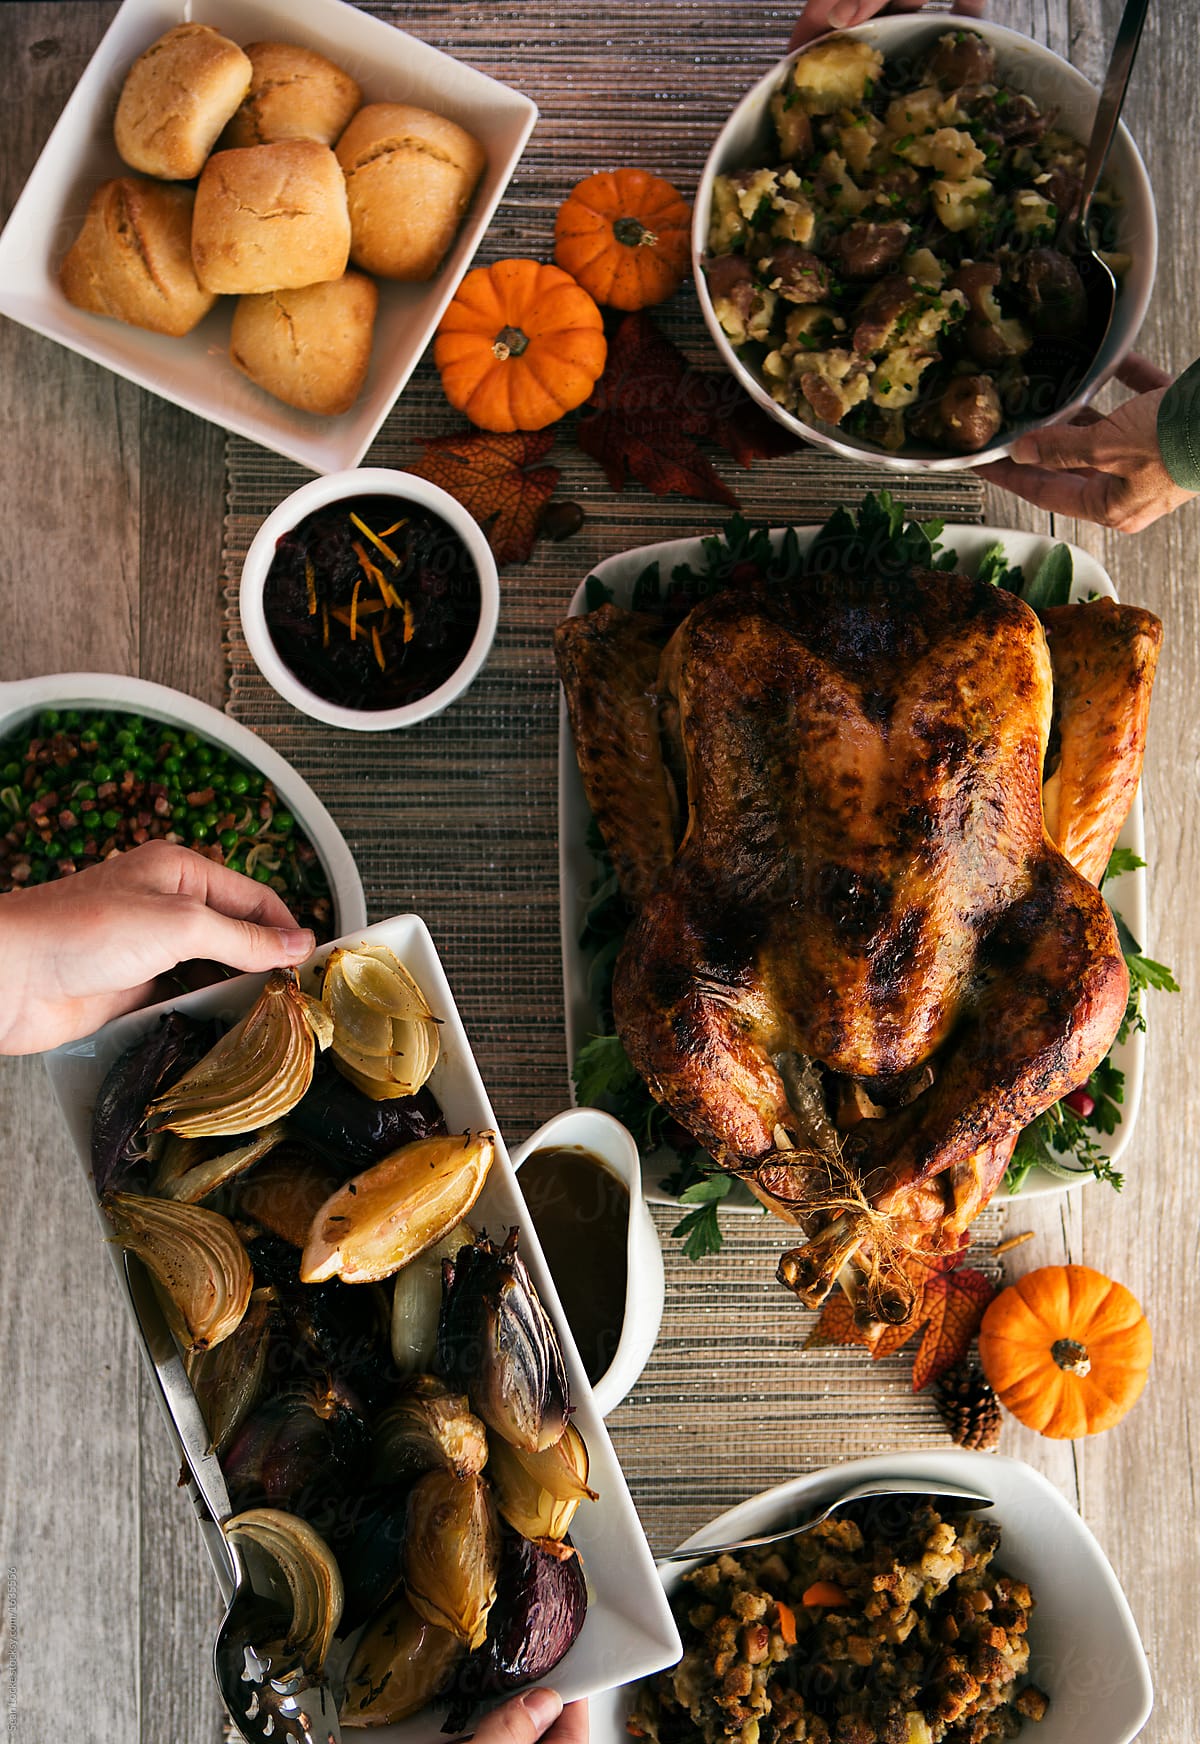 Thanksgiving: Putting Side Dishes On Table With Turkey